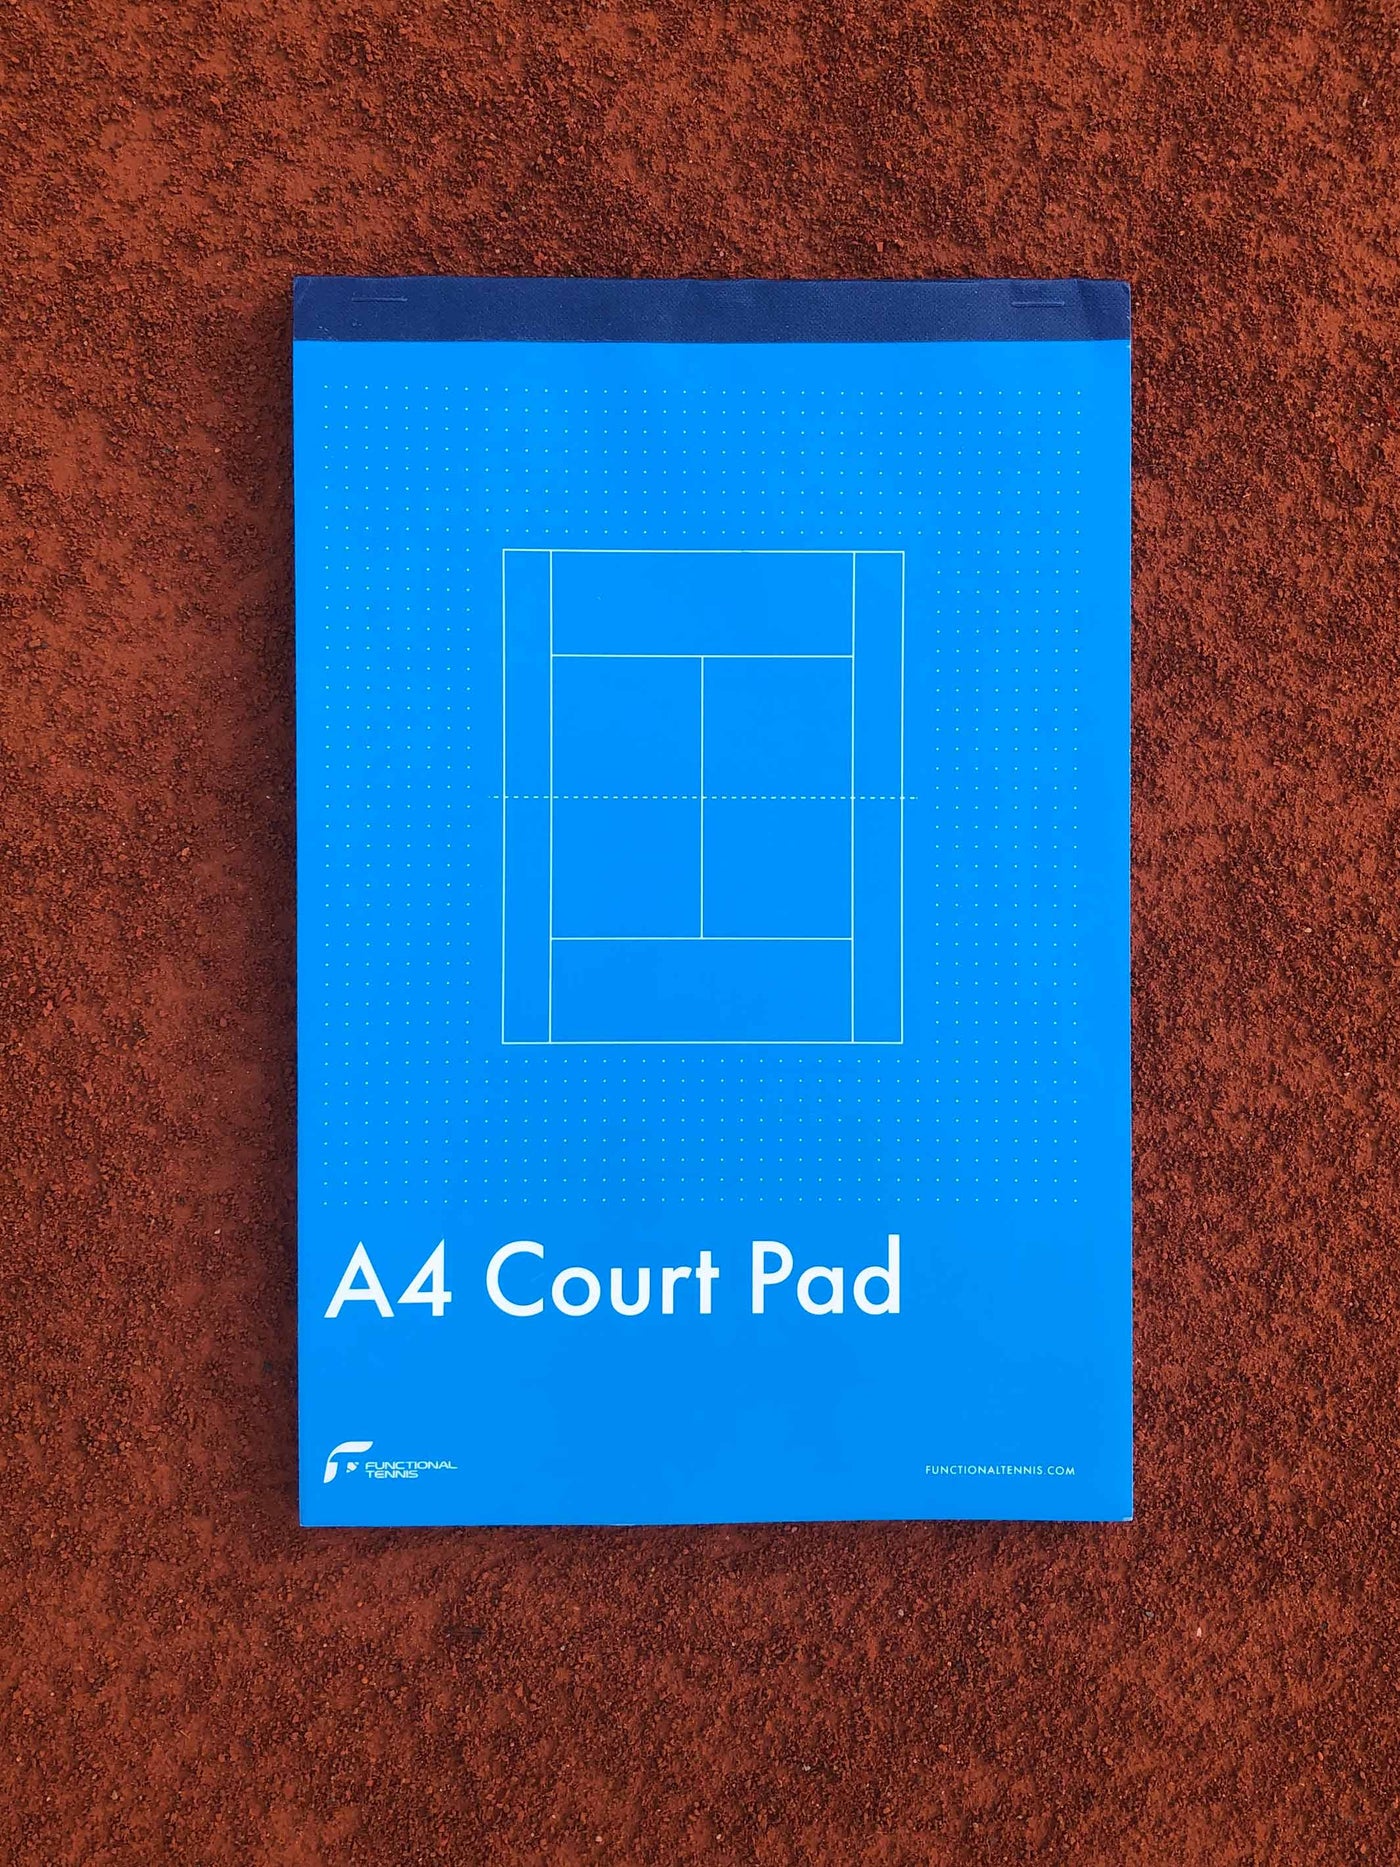 The Court Pad